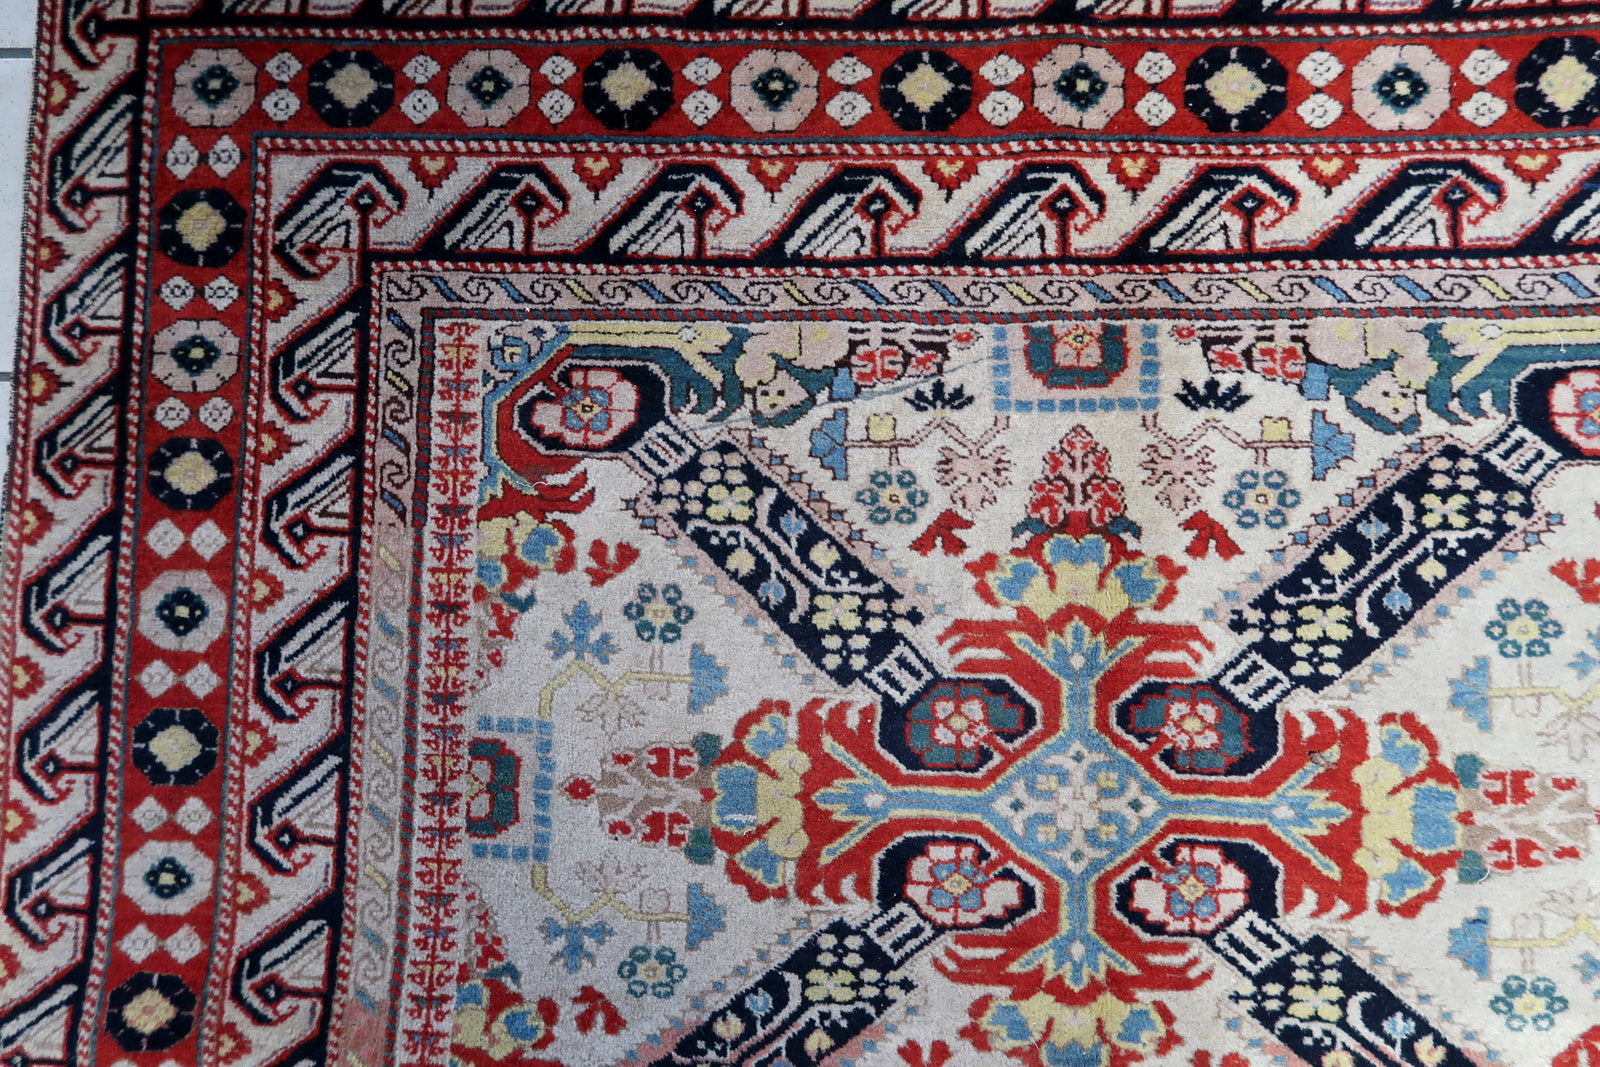 Detailed shot showcasing the texture and weave of the handmade vintage Caucasian Zeyhur rug